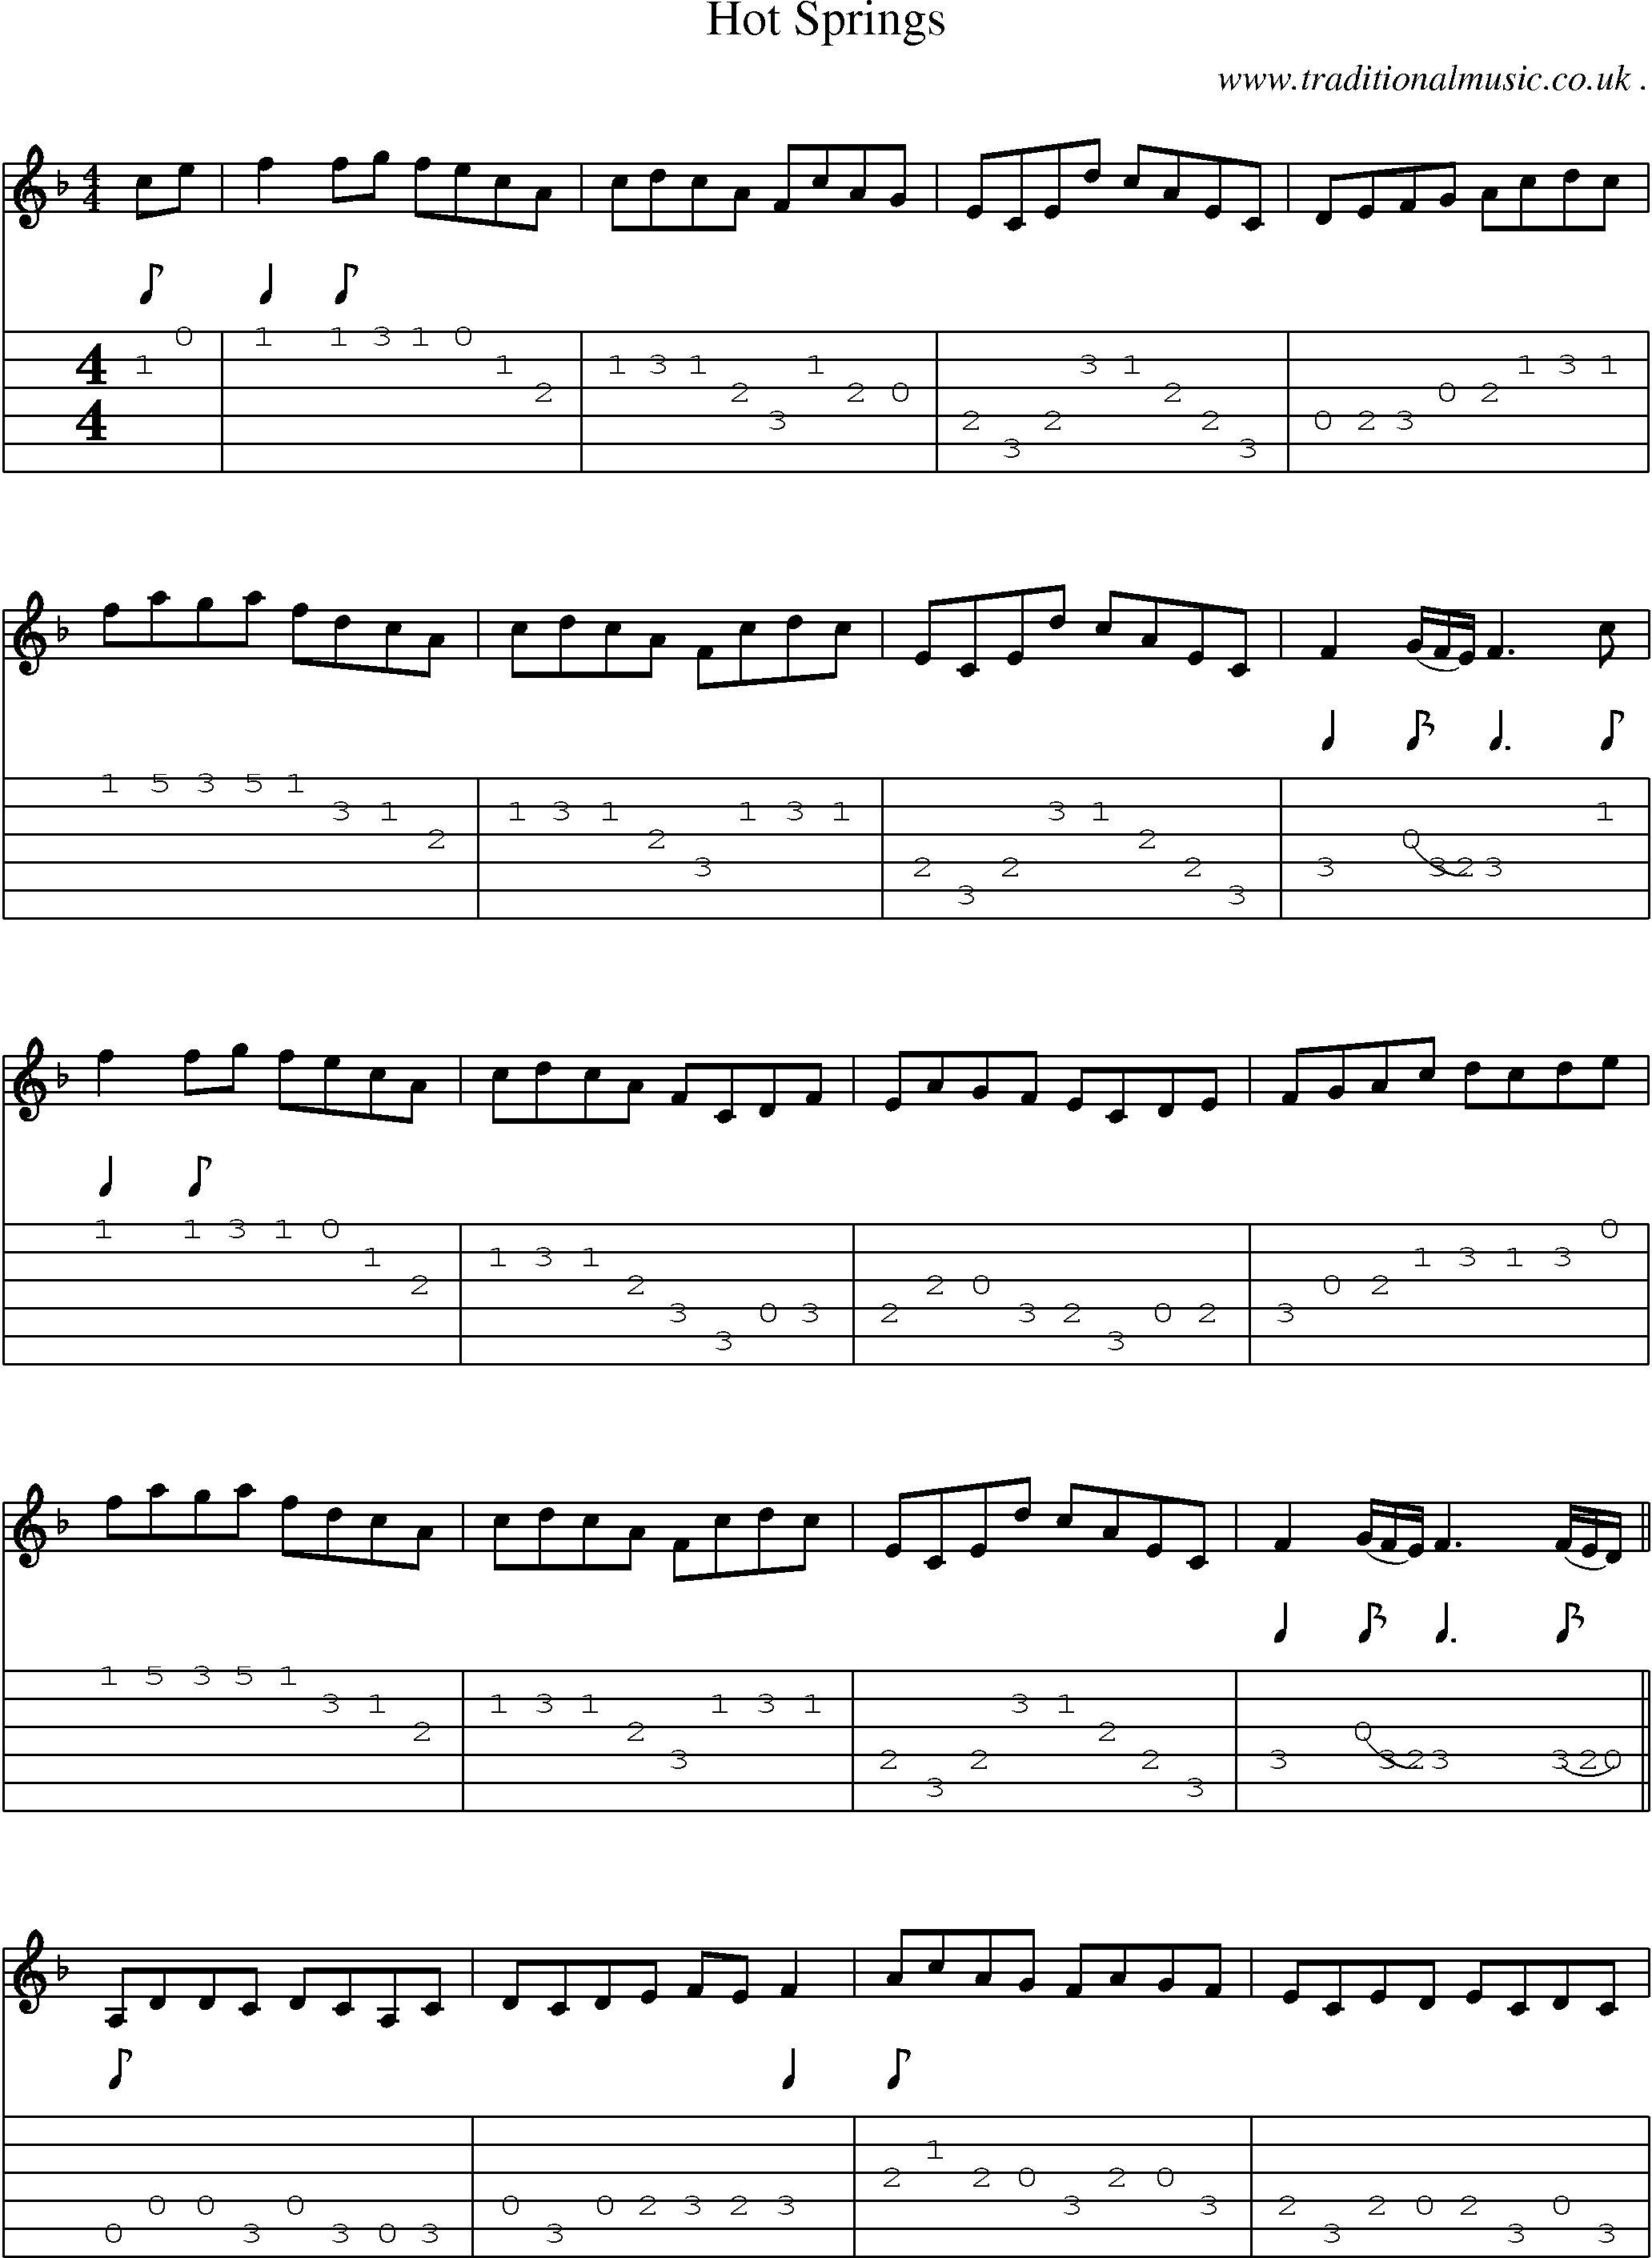 Sheet-Music and Guitar Tabs for Hot Springs